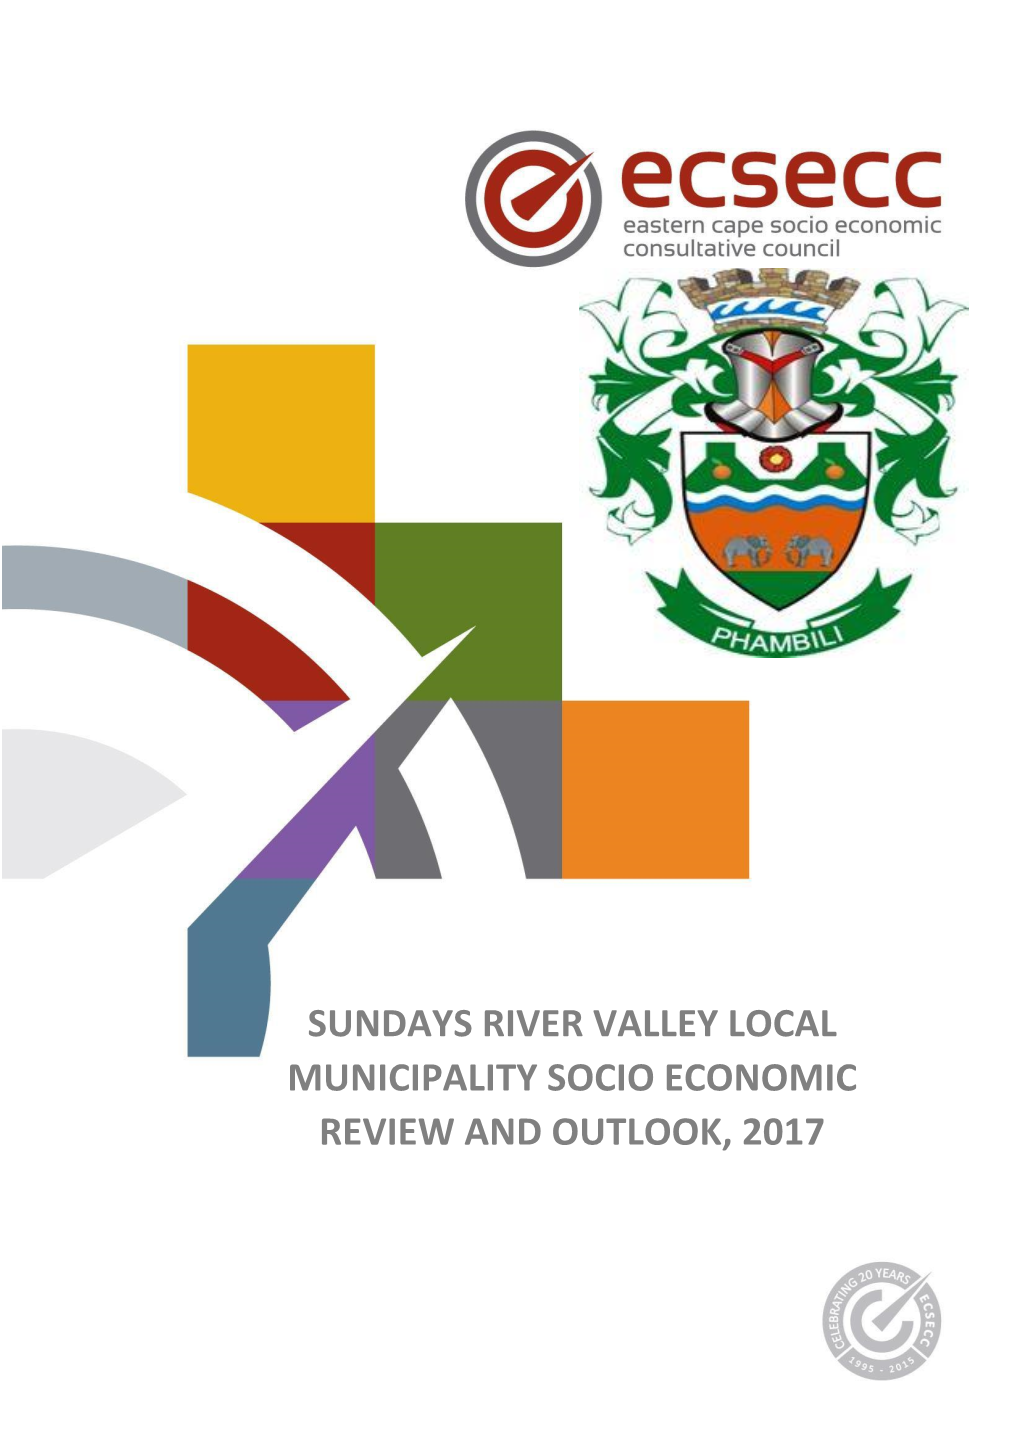 Sundays River Valley Local Municipality Socio Economic Review and Outlook, 2017